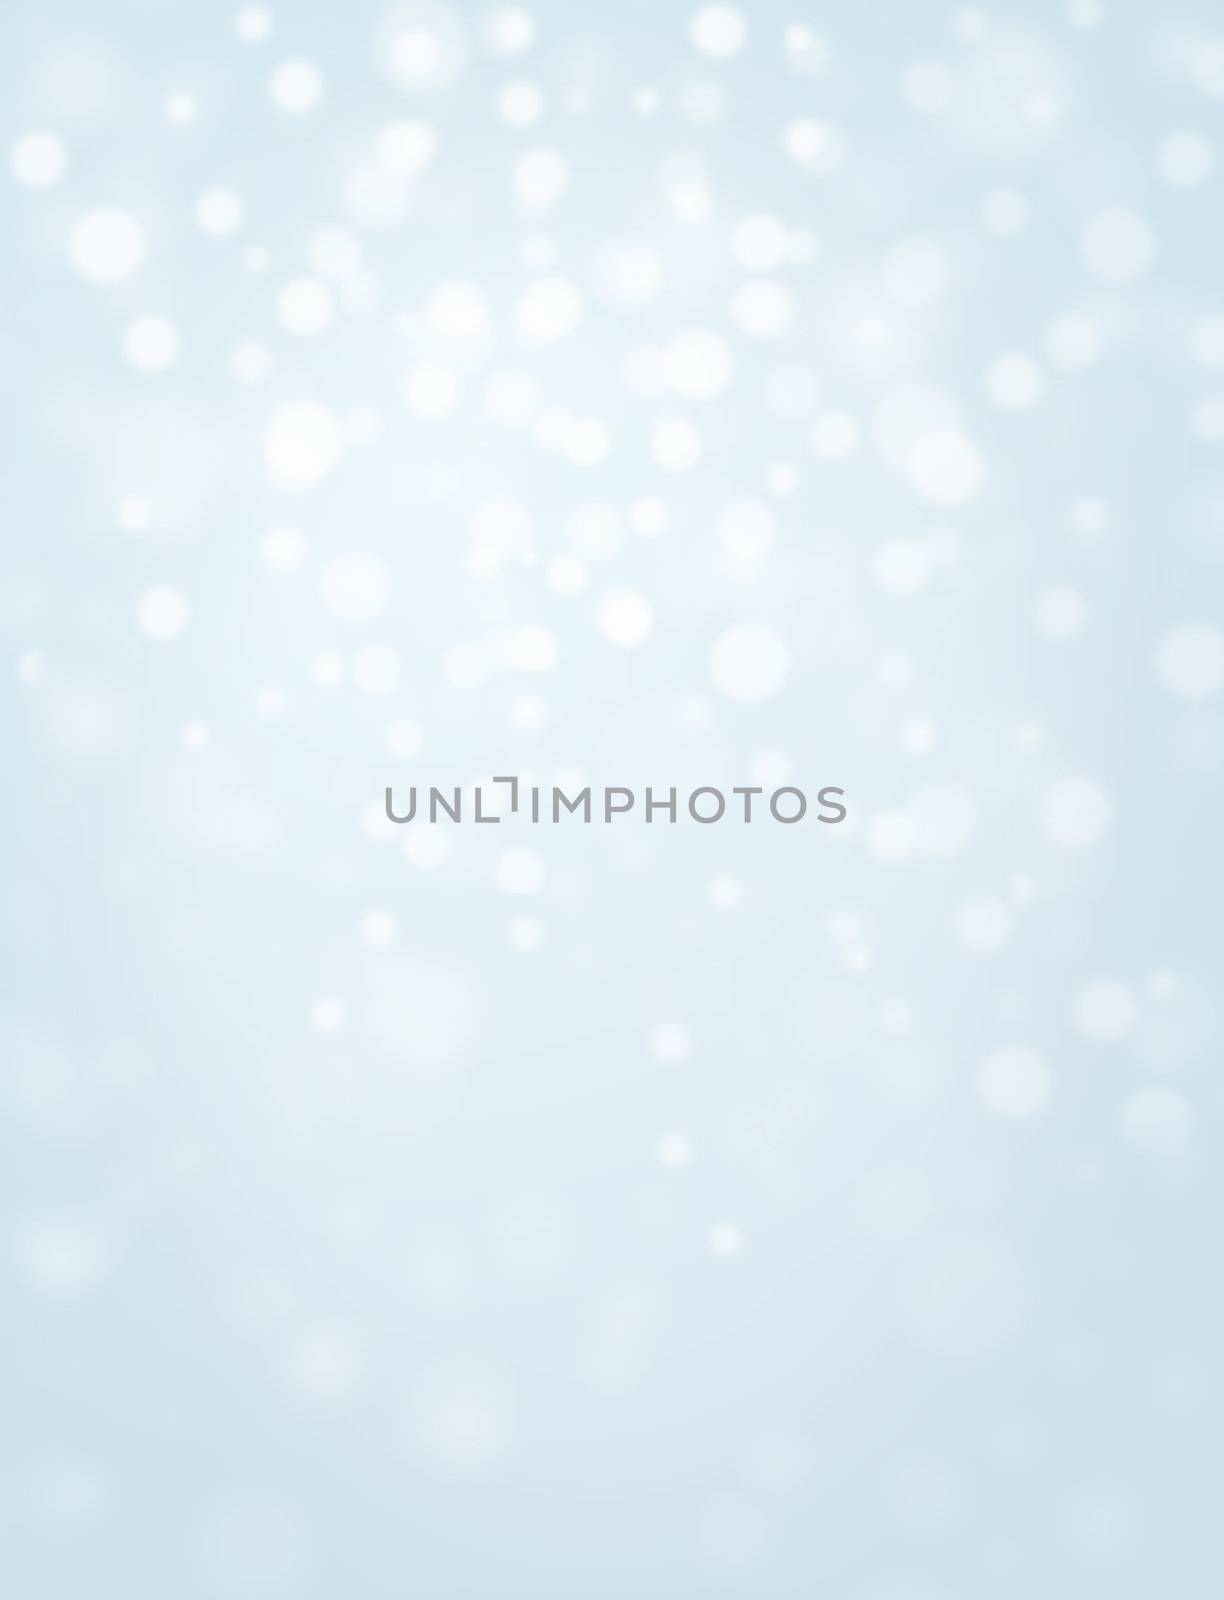 Large soft light snowy background by Mirage3